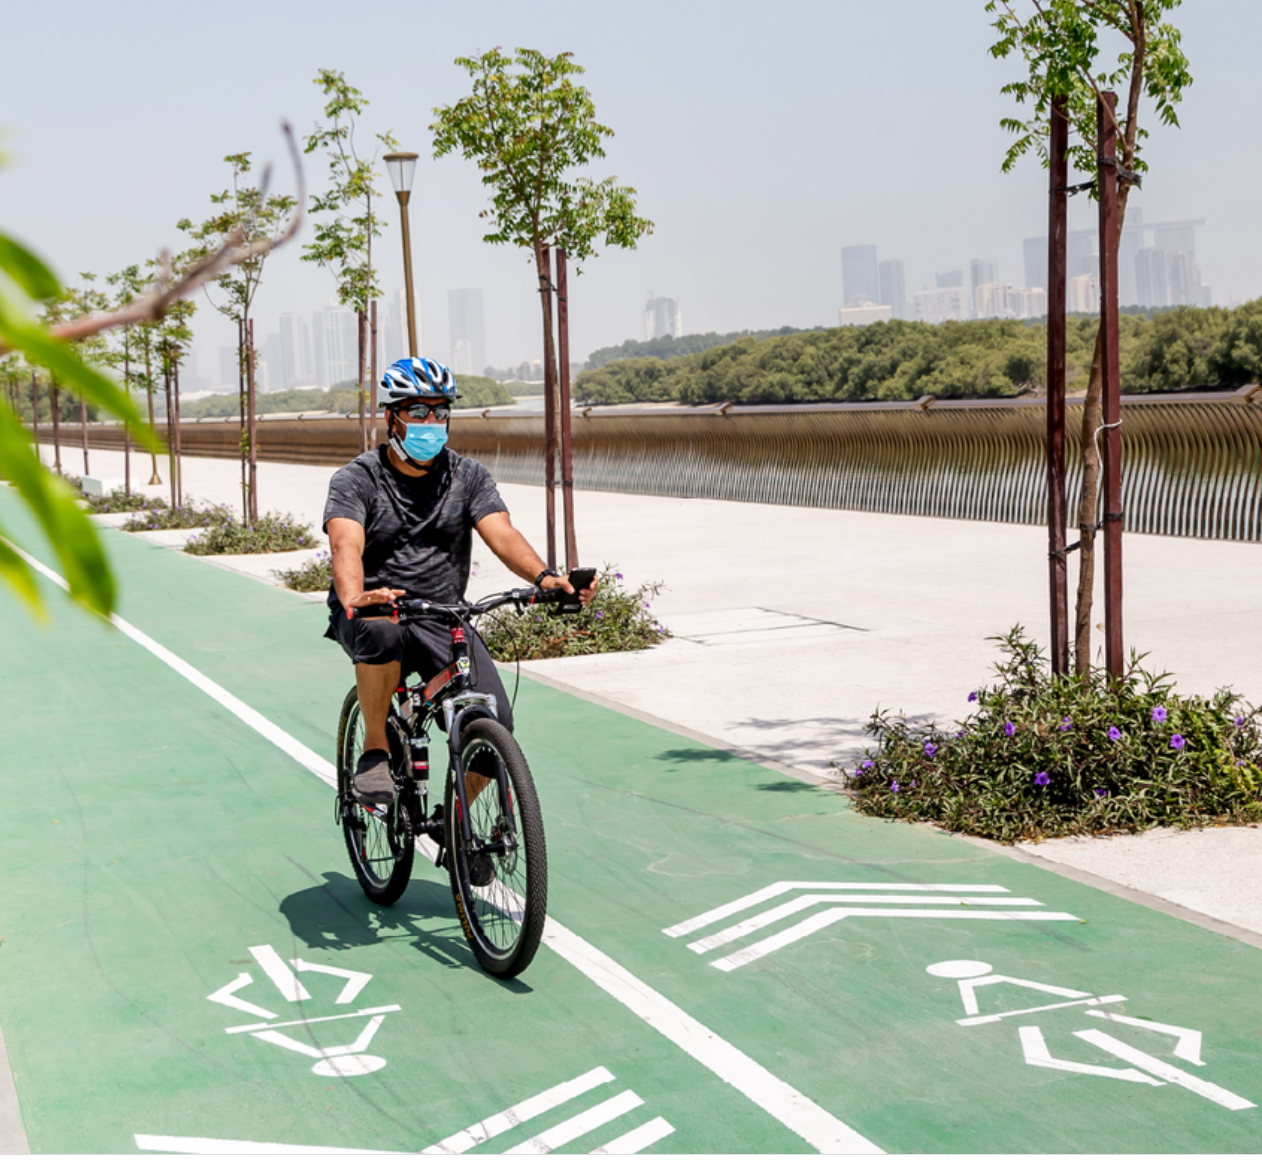 Fines On Violations Of Bicycles, Electric Bikes Regulation In Abu Dhabi Are Now Being Enforced